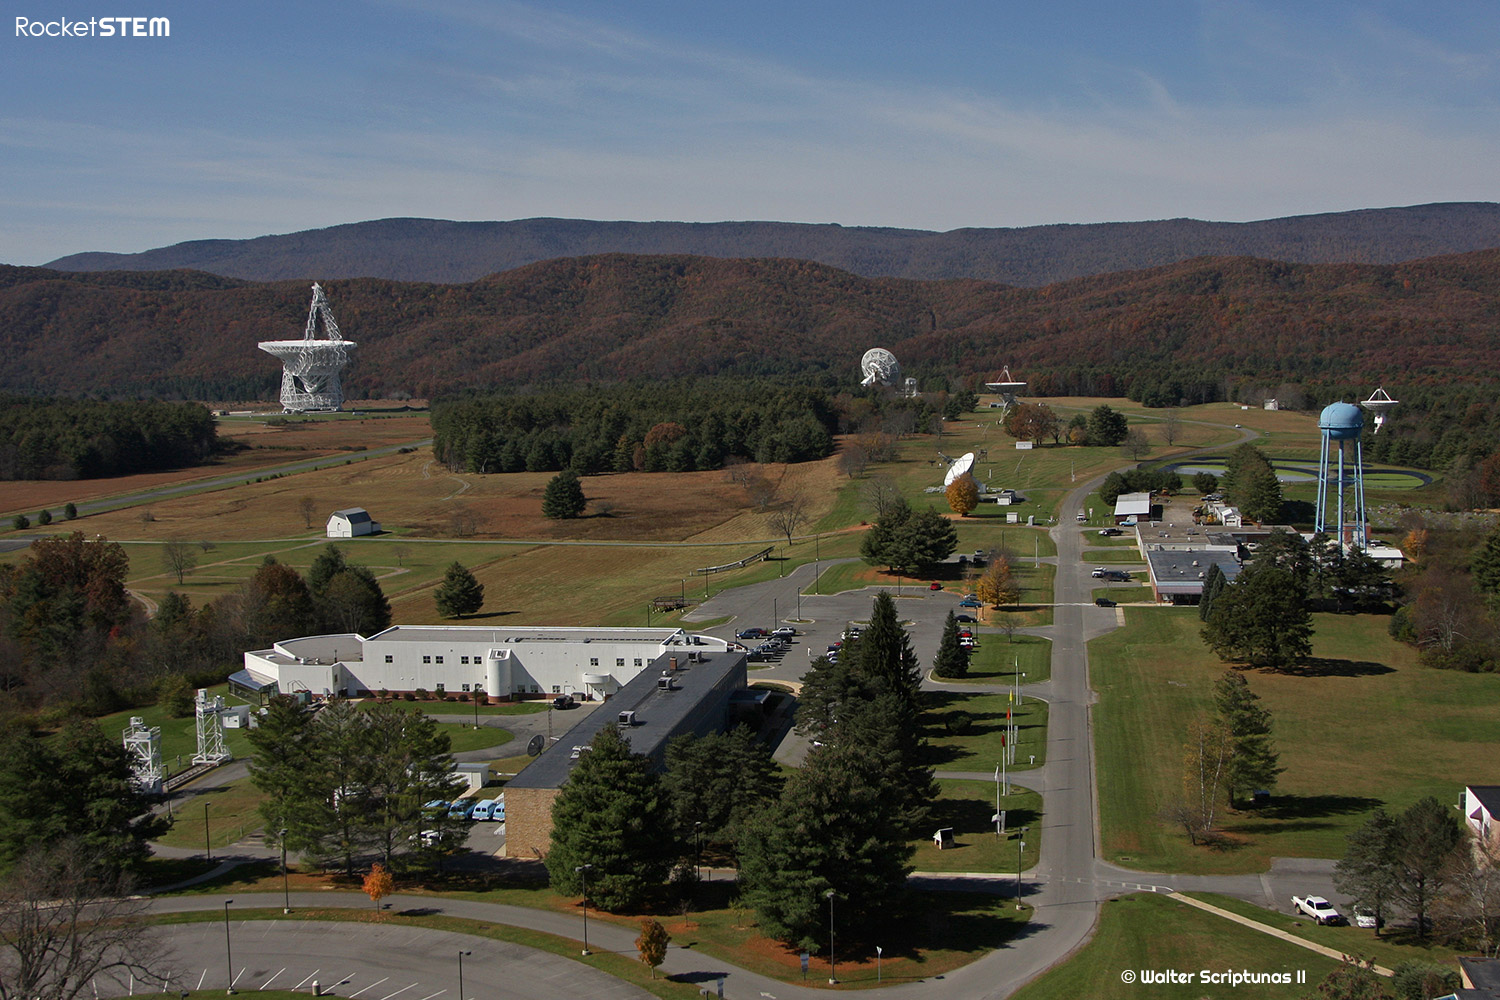 The Green Bank Telescope is the world’s largest fully steerable radio telescope. Sitting within the heart of the National Radio Quiet Zone, The telescope focuses 2.3 acres of radio light on sensitive receivers at the top of the telescope. It is 485 feet tall which is nearly as tall as the nearby mountains. Photo: Walter Scriptunas II